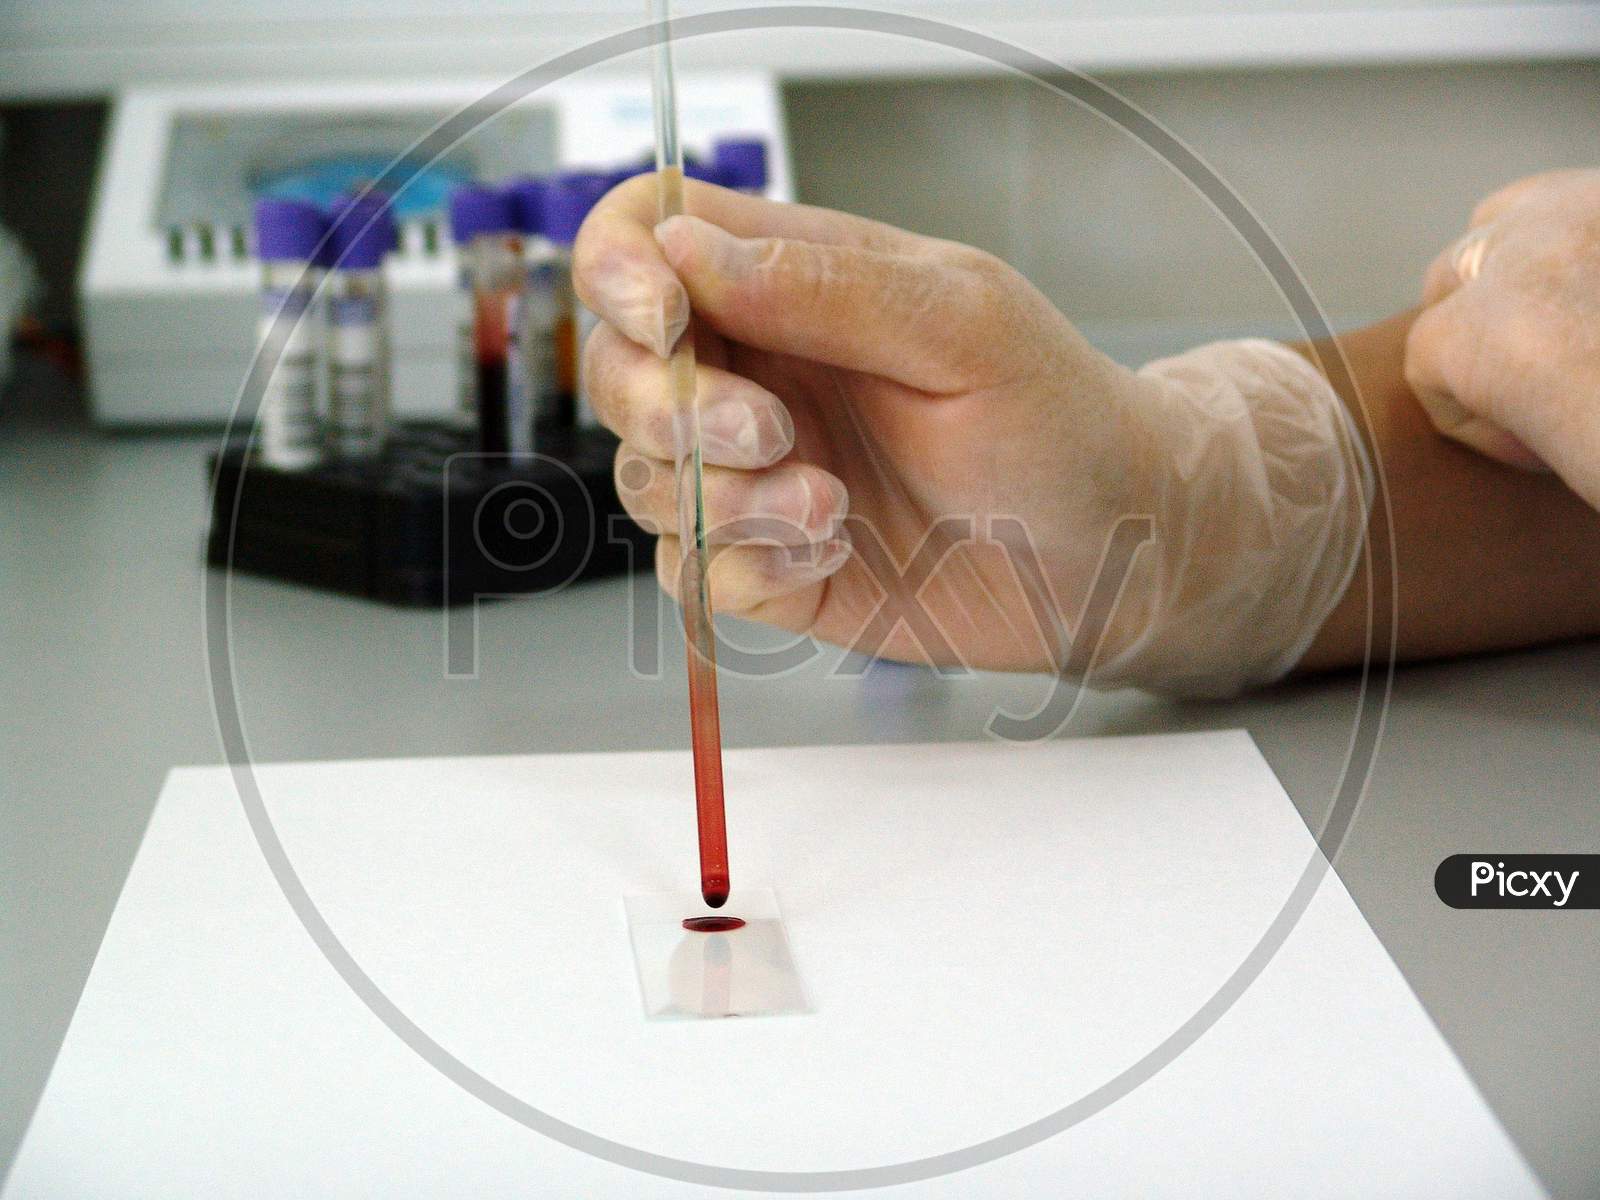 Putting a drop of blood on glass slide